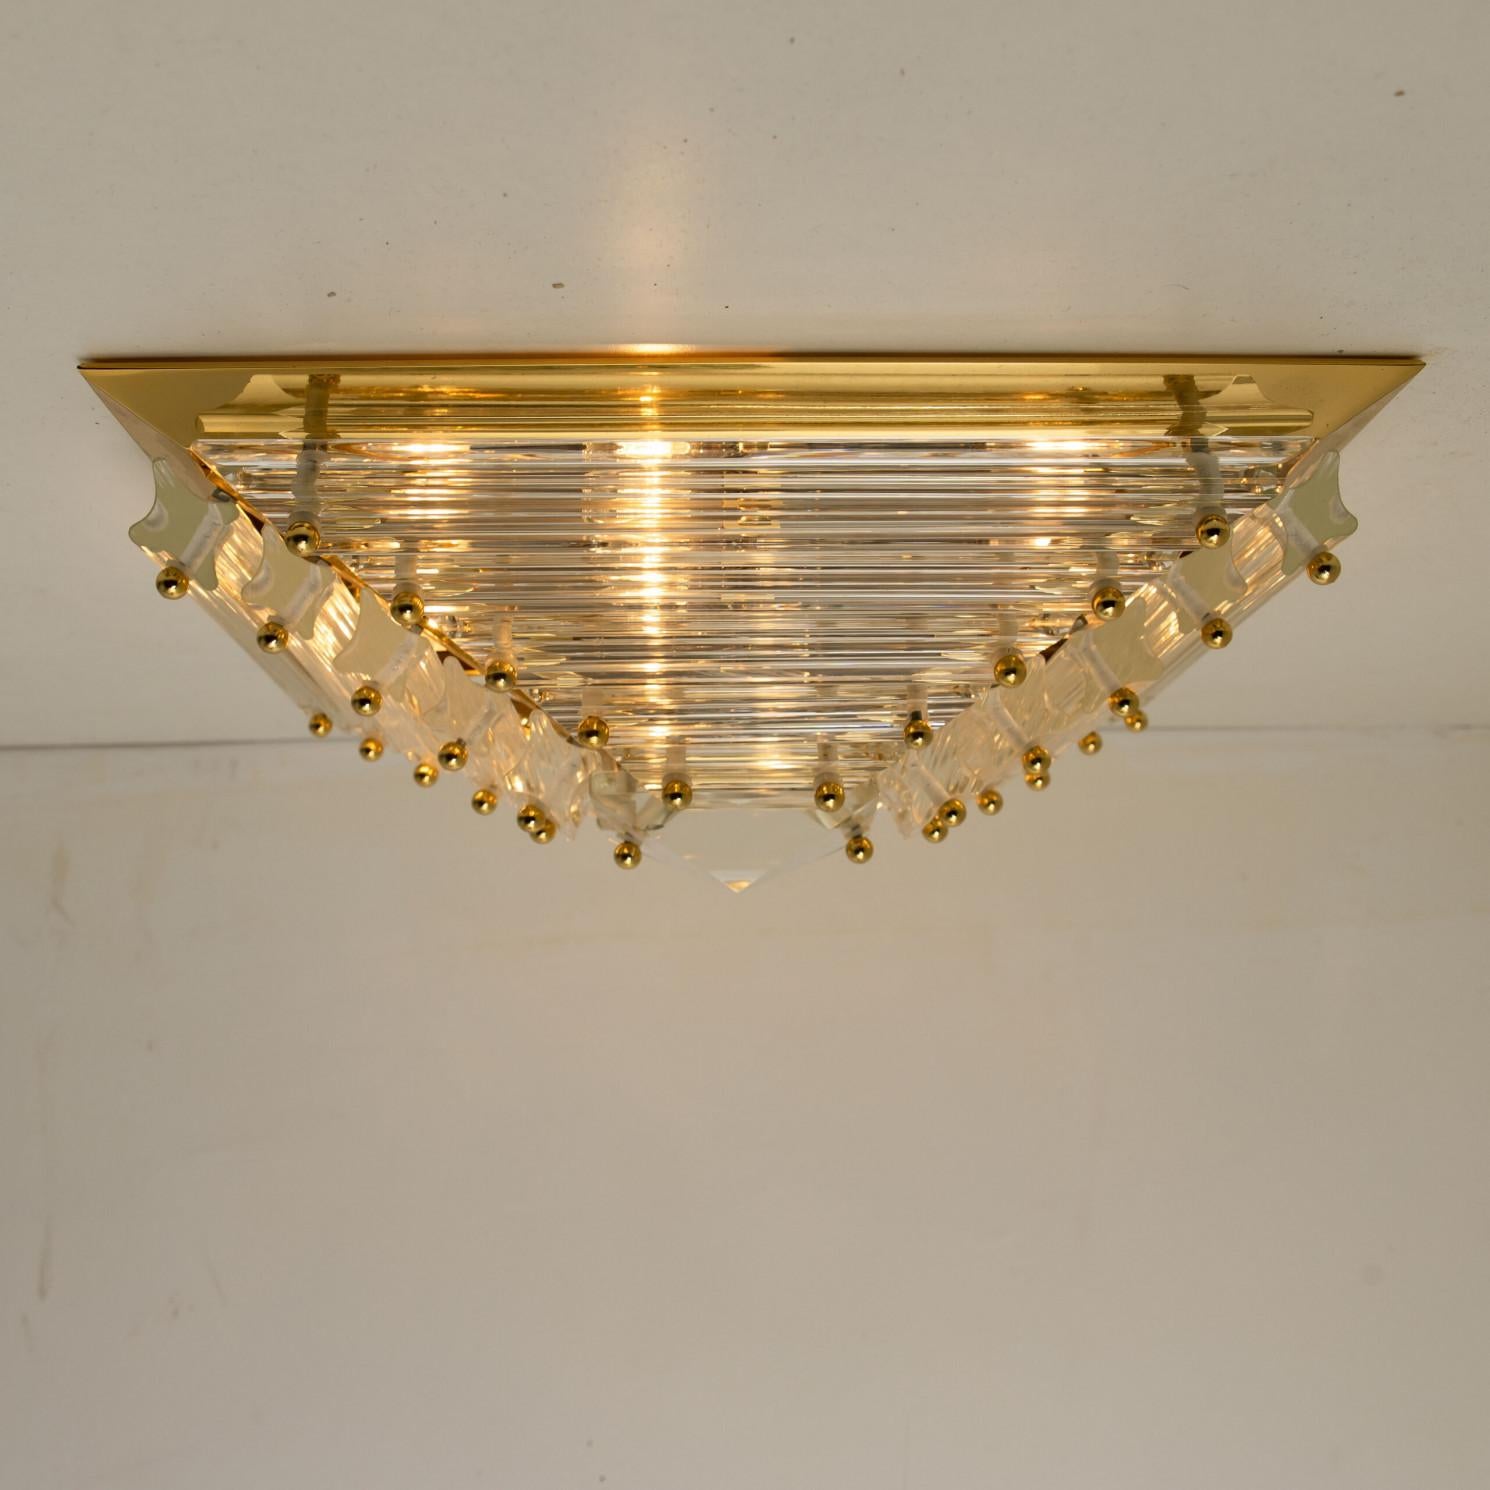 1 of the 2 Large Gold-Plated Piramide Venini Flush Mounts, 1970s, Italy For Sale 8